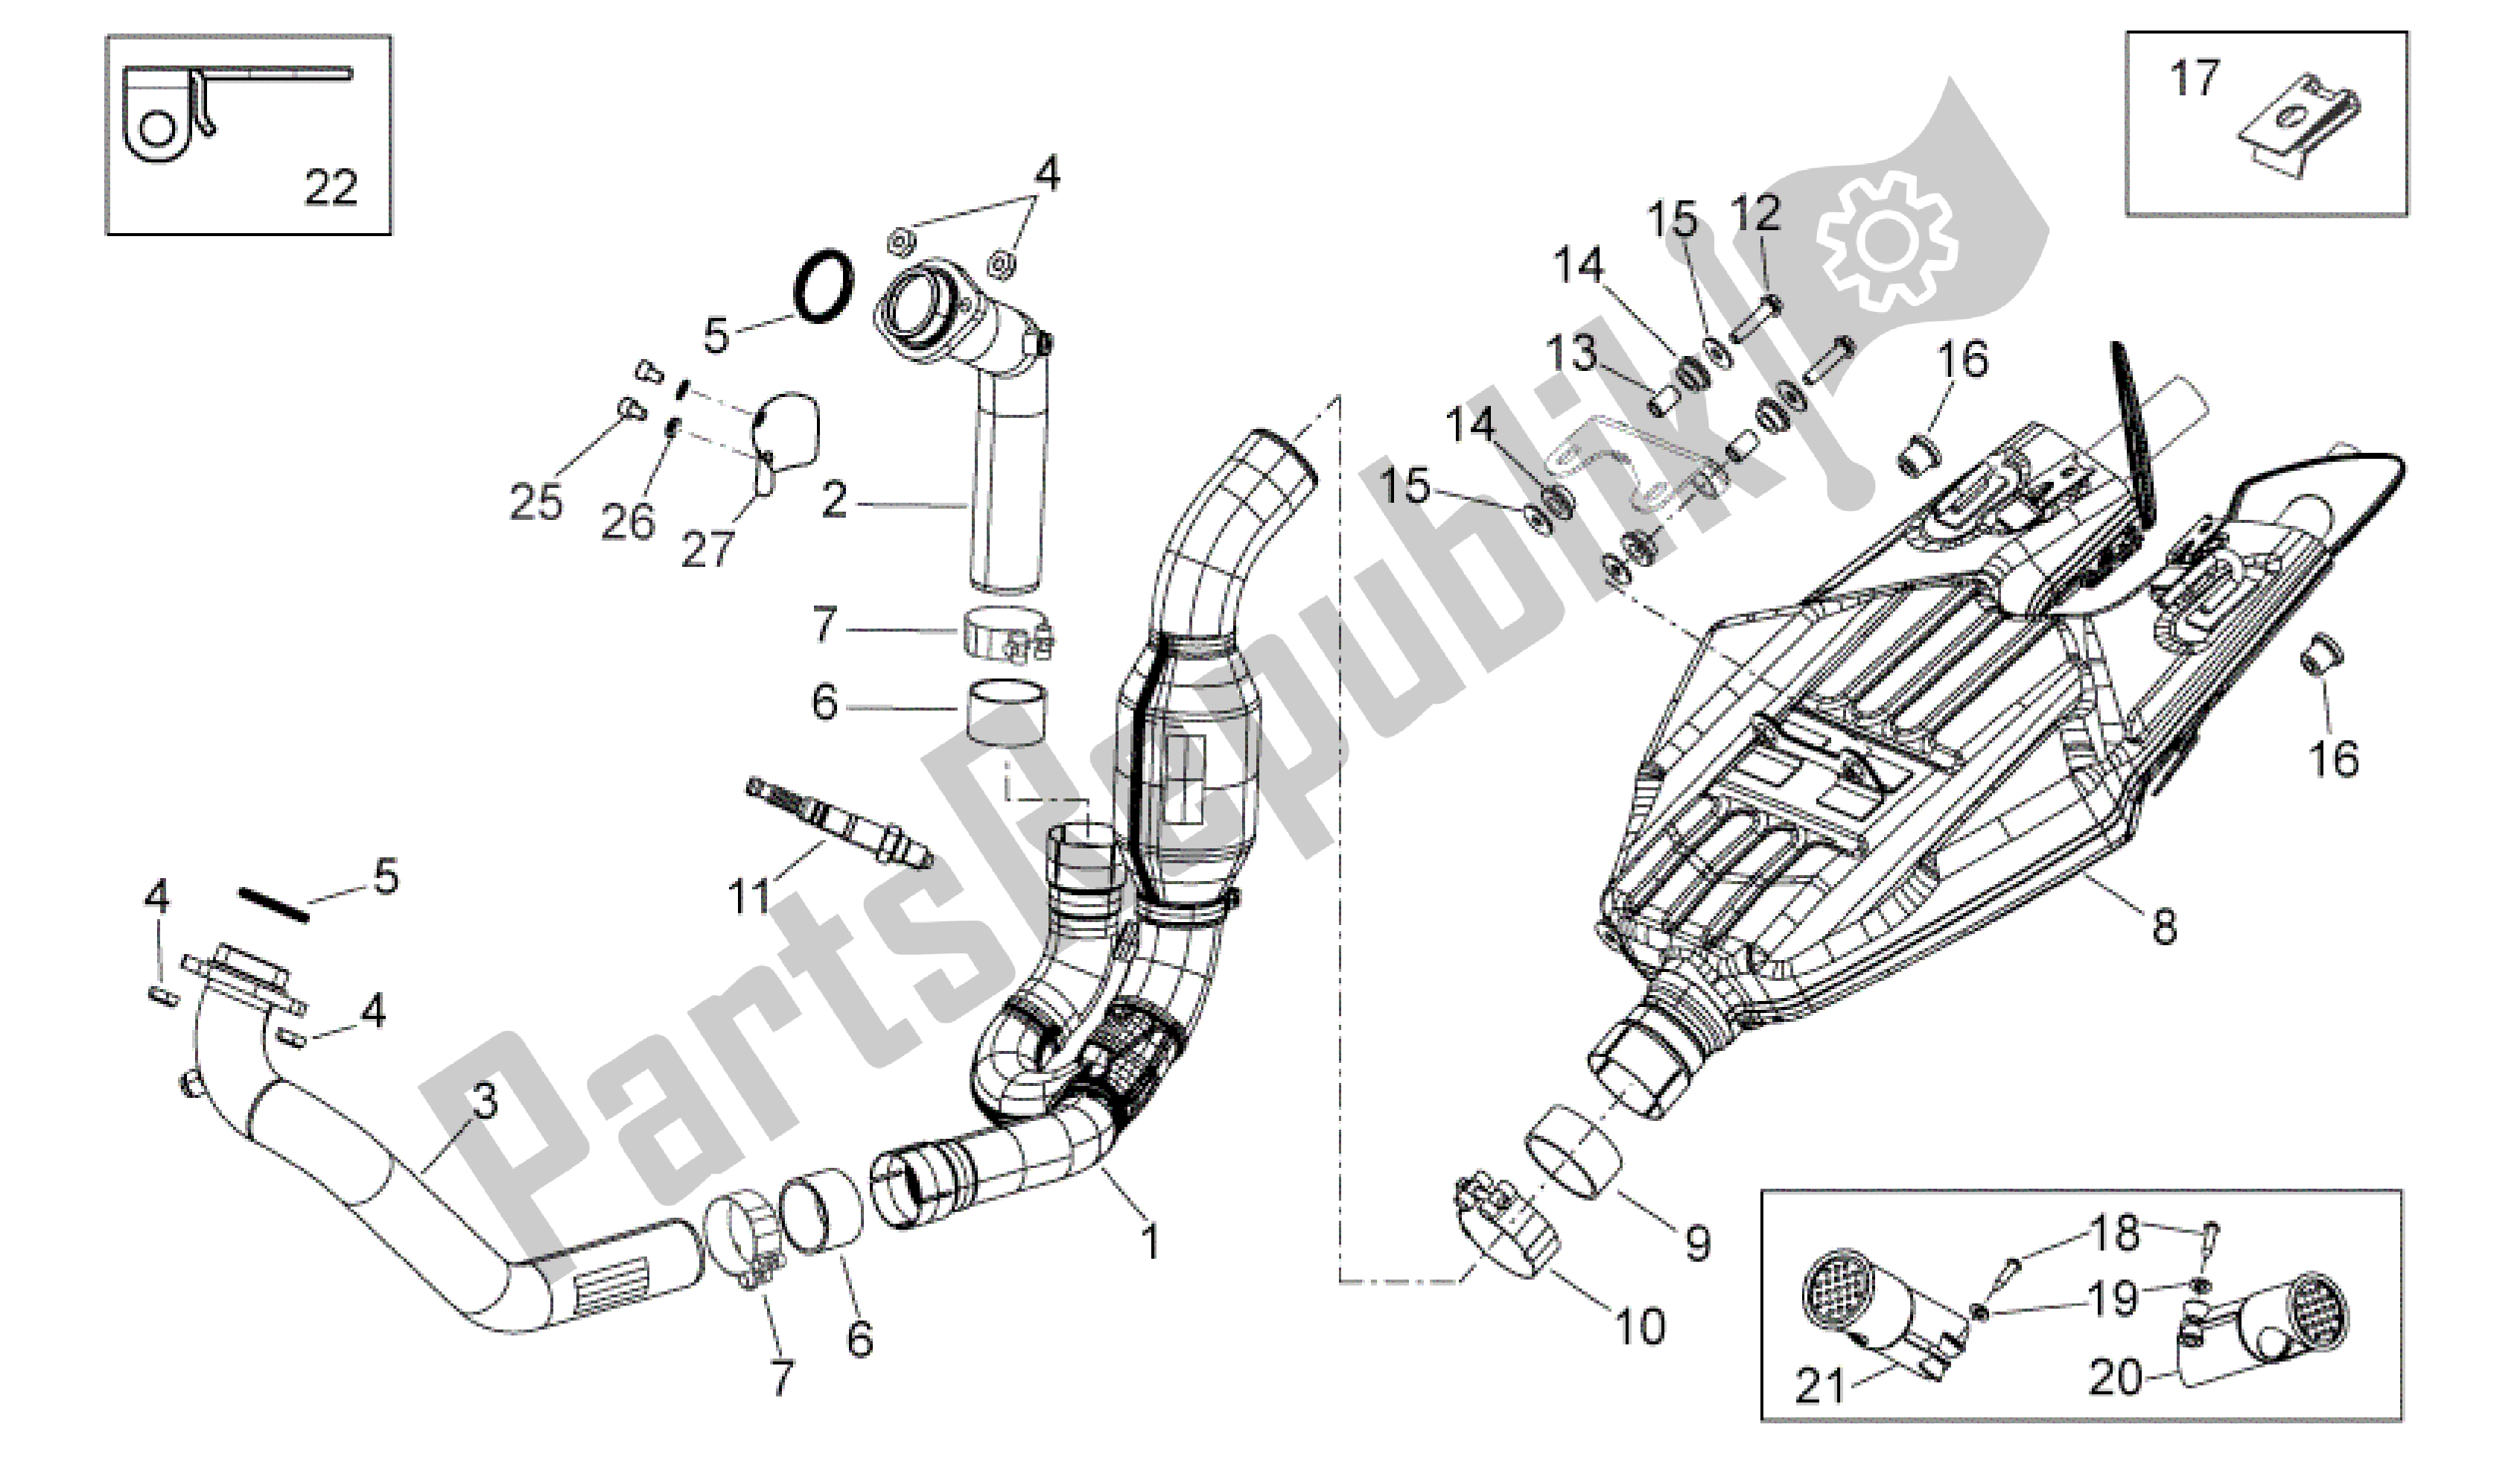 All parts for the Exhaust Unit of the Aprilia Shiver 750 2010 - 2013